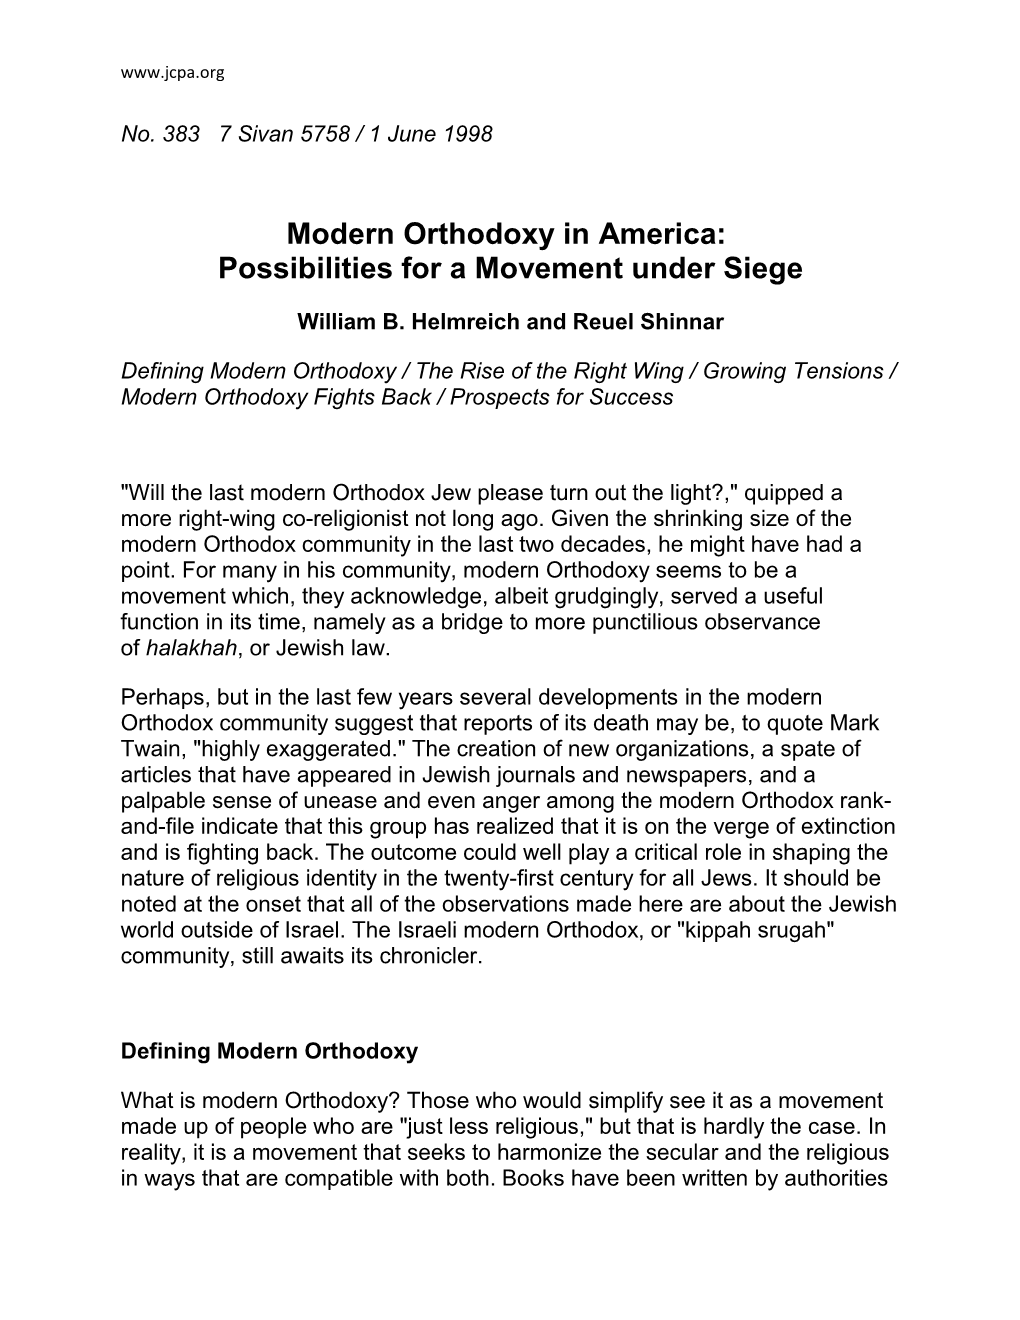 Modern Orthodoxy in America: Possibilities for a Movement Under Siege